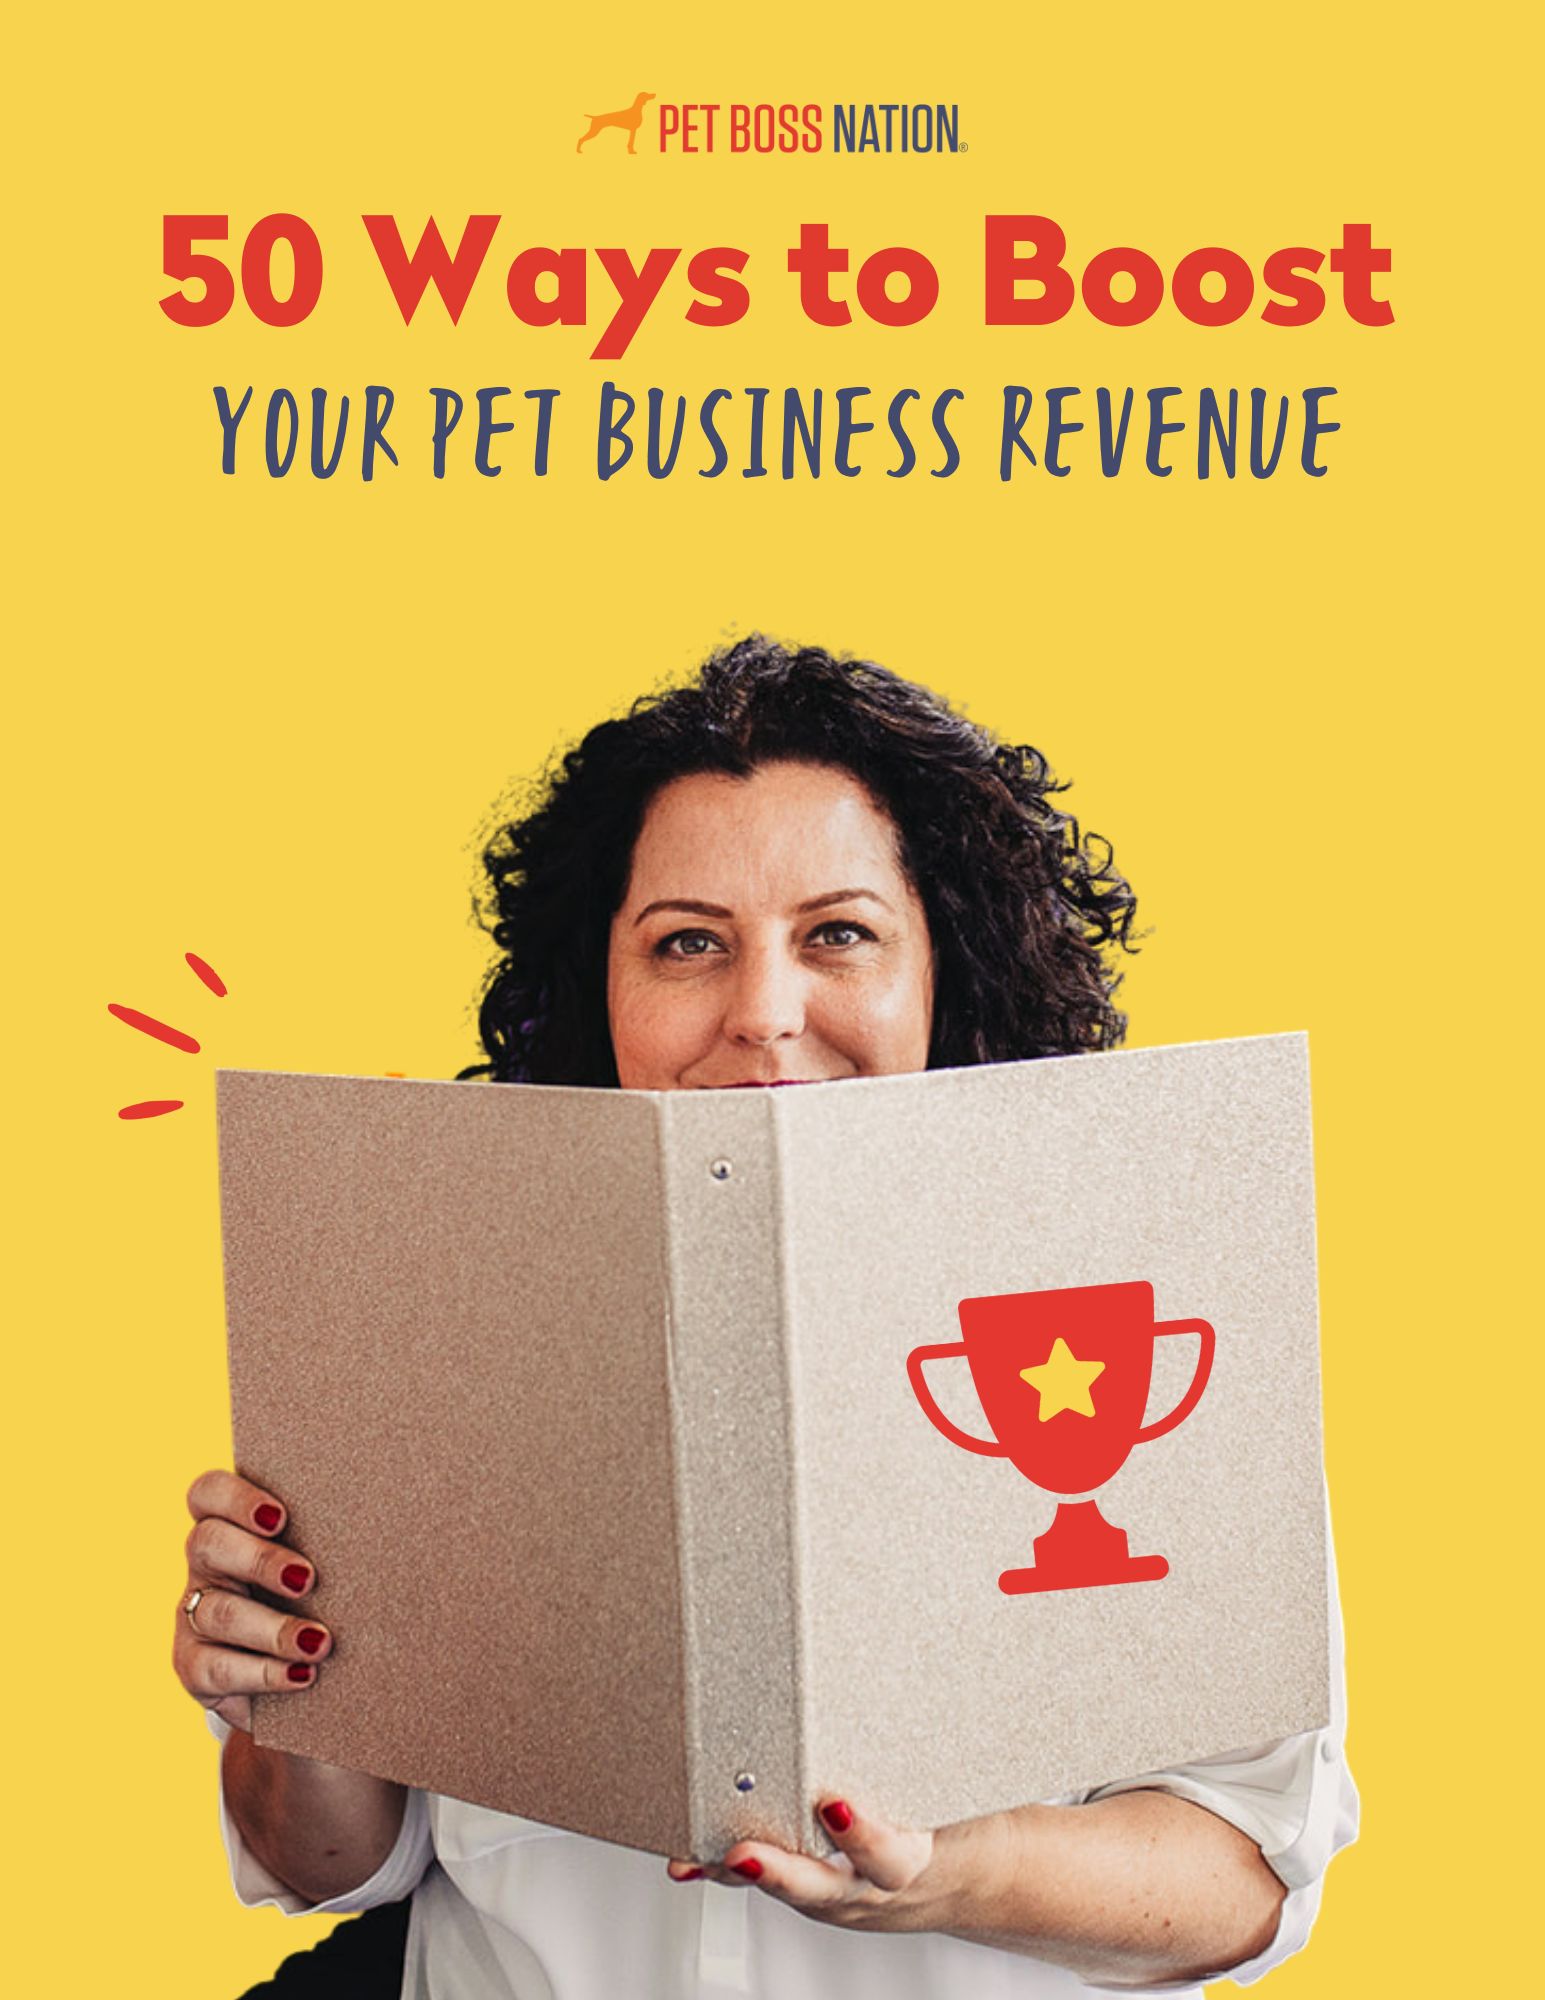 50 Ways to Boost Your Pet Business Revenue